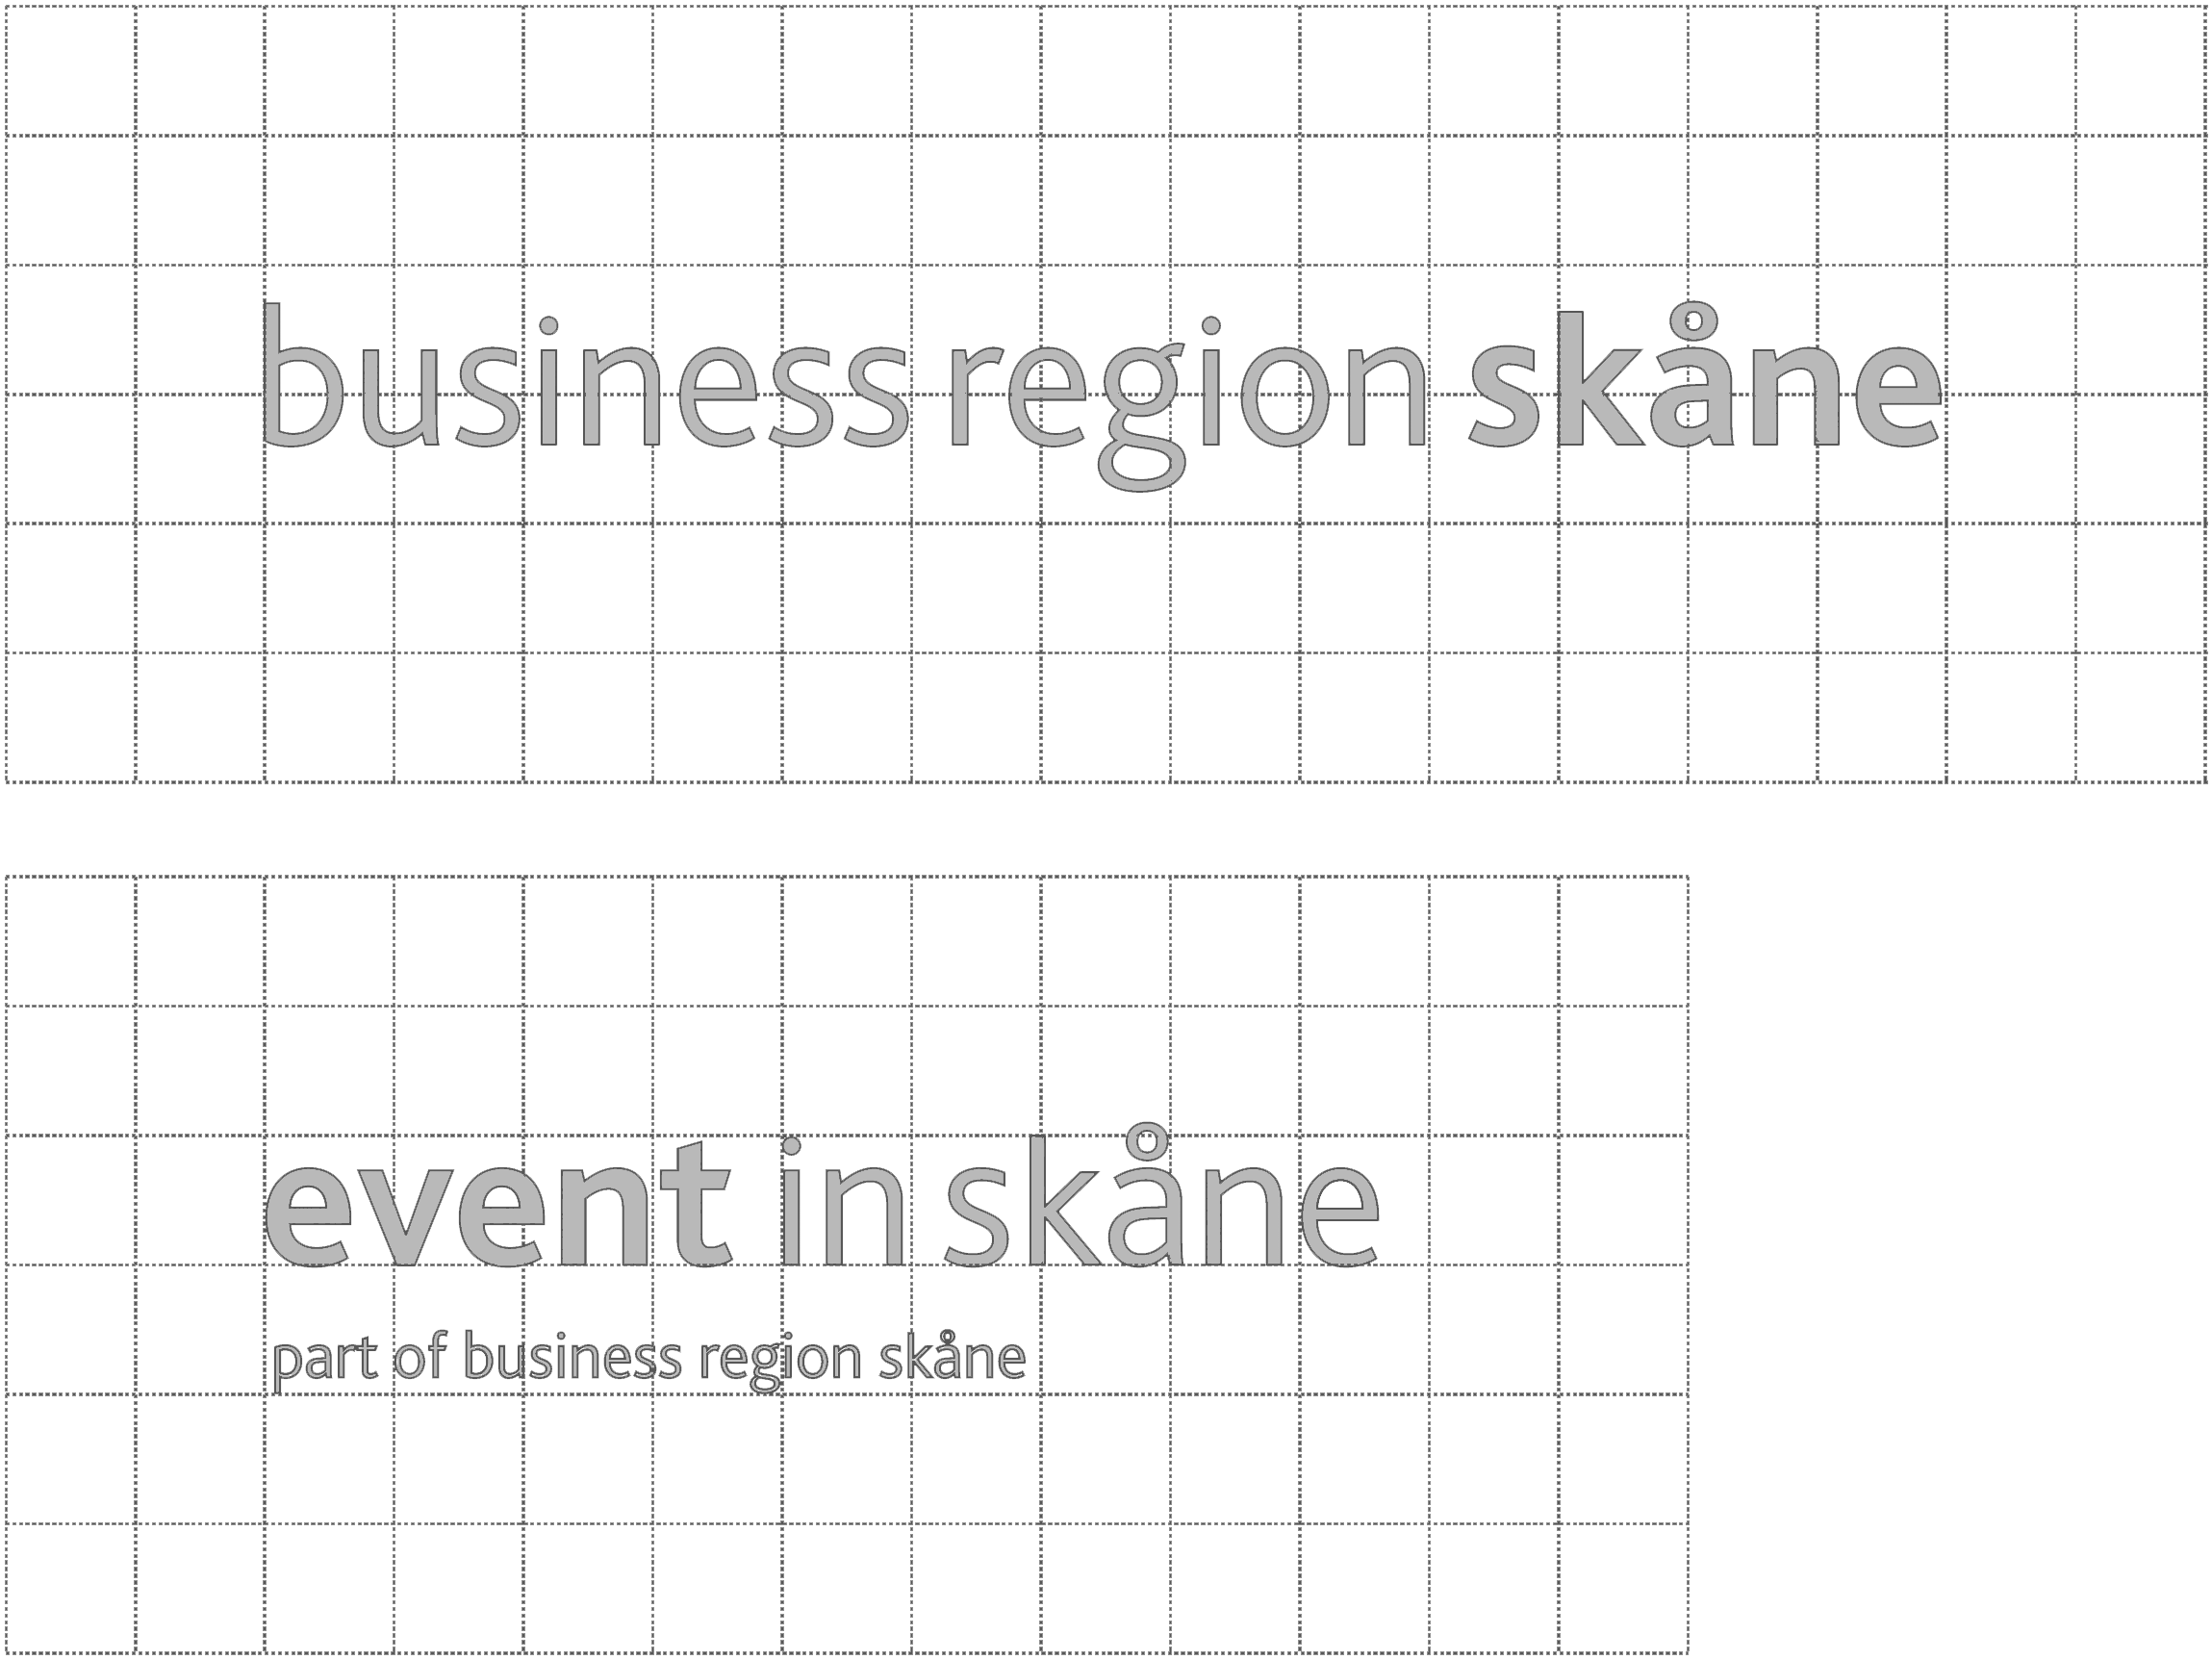 Graphic illustration of dimensions and spacing for Business Region Skånes logotypes